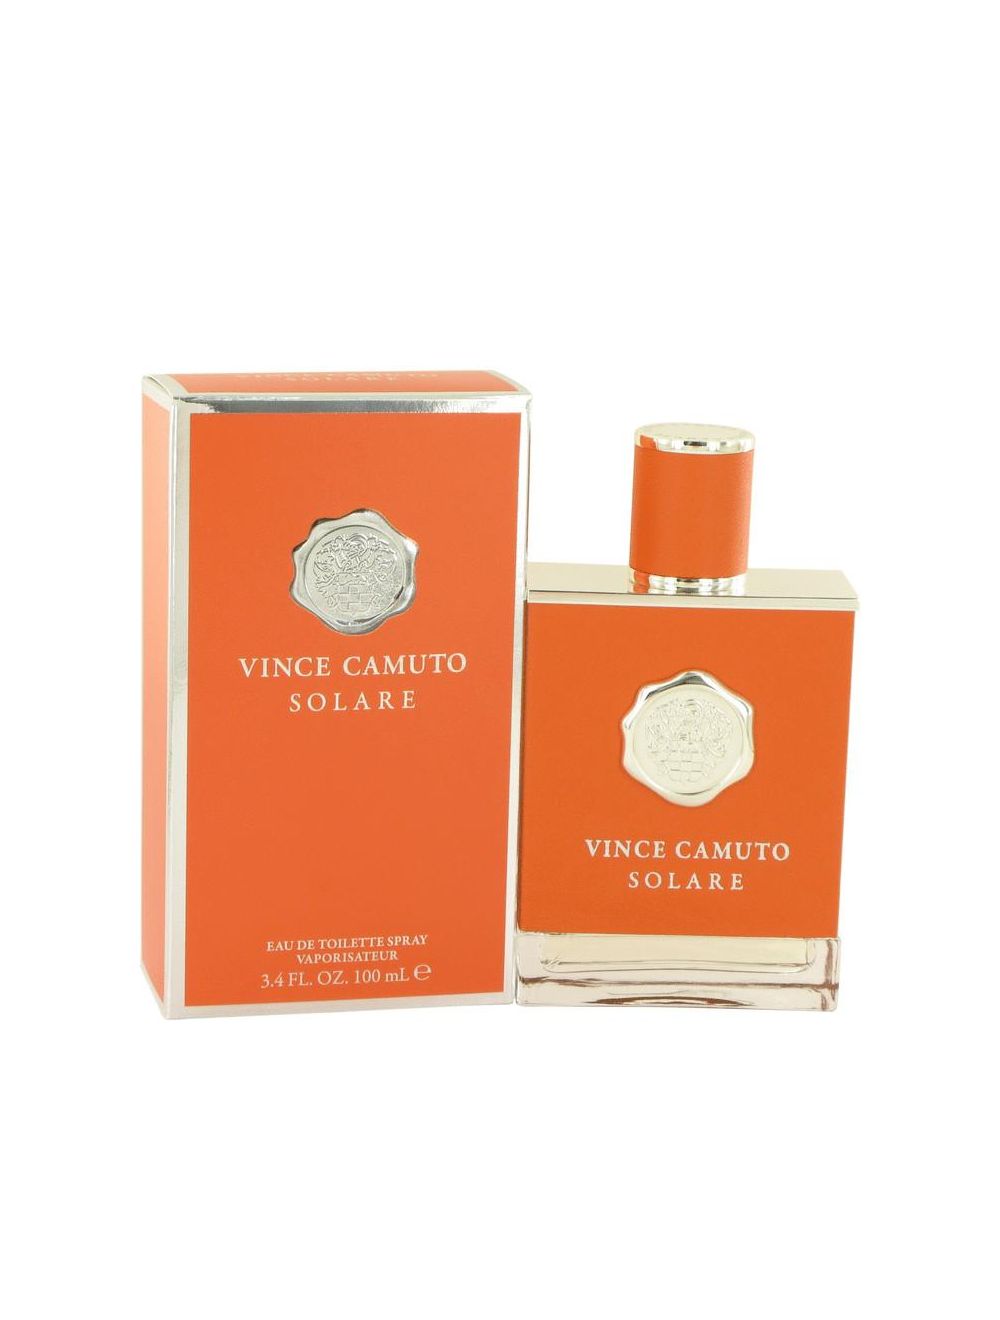 Vince Camuto by Vince Camuto 3.4 oz EDT Cologne for Men Brand New